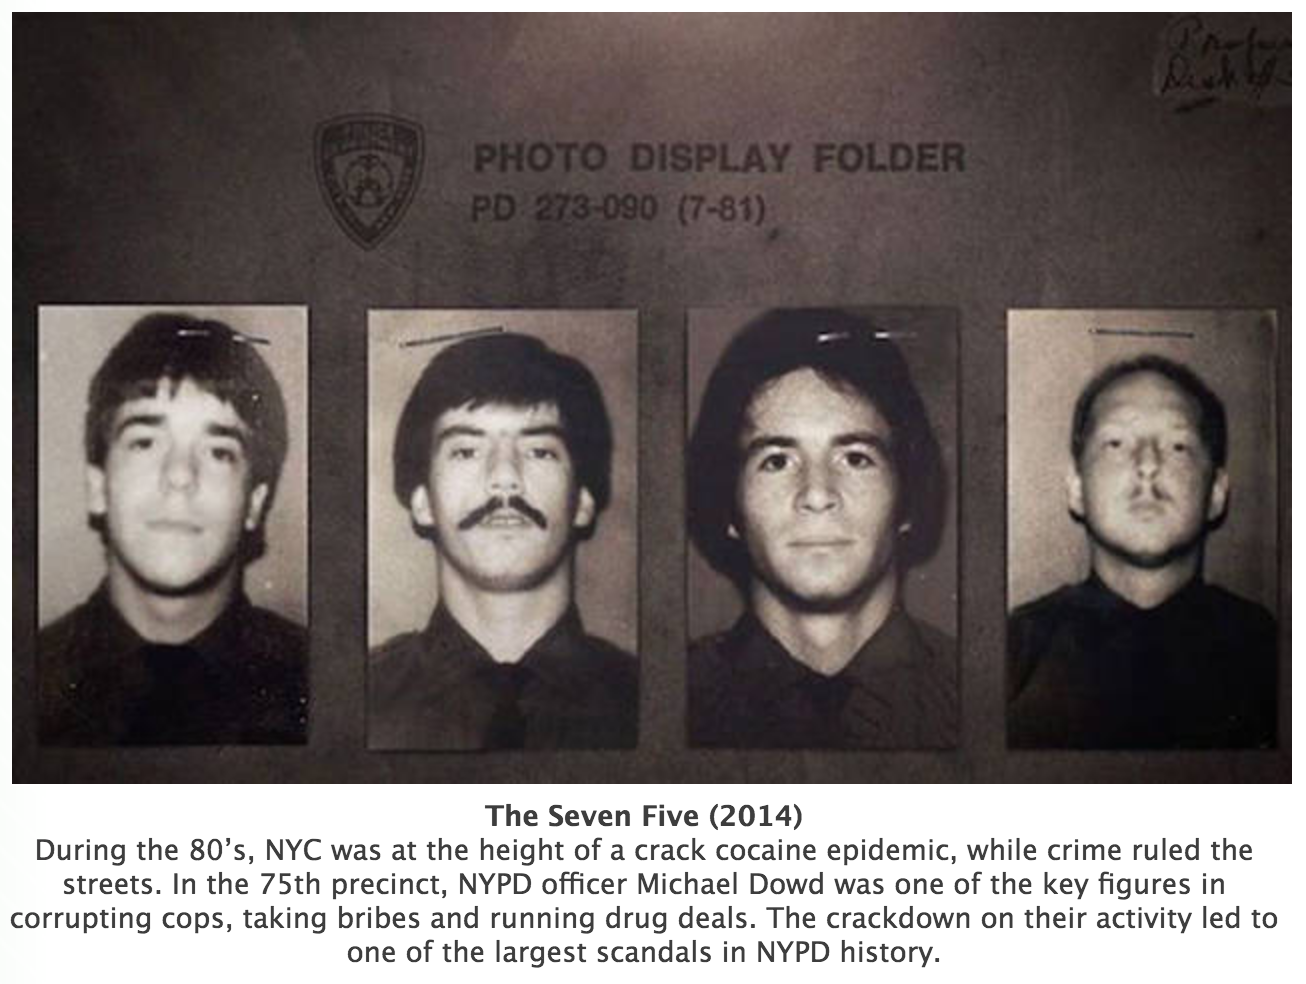 seven five documentary - Photo Display Folder Pd 273090 781 The Seven Five 2014 During the 80's, Nyc was at the height of a crack cocaine epidemic, while crime ruled the streets. In the 75th precinct, Nypd officer Michael Dowd was one of the key figures i